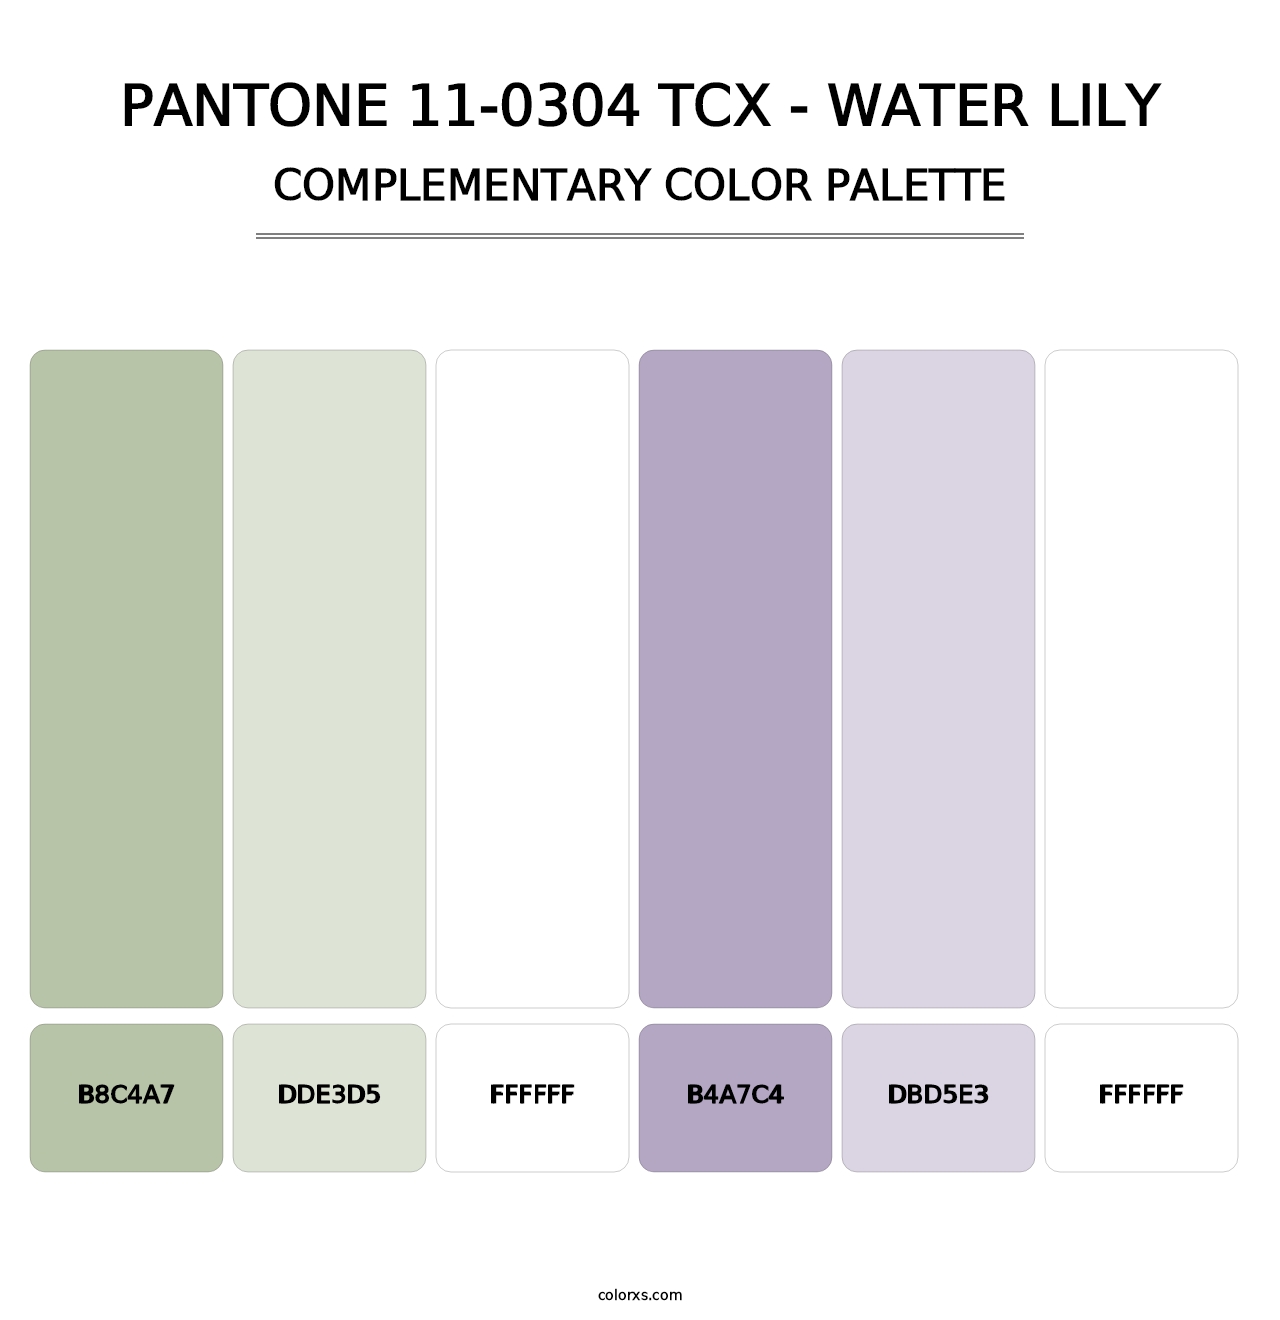 PANTONE 11-0304 TCX - Water Lily - Complementary Color Palette